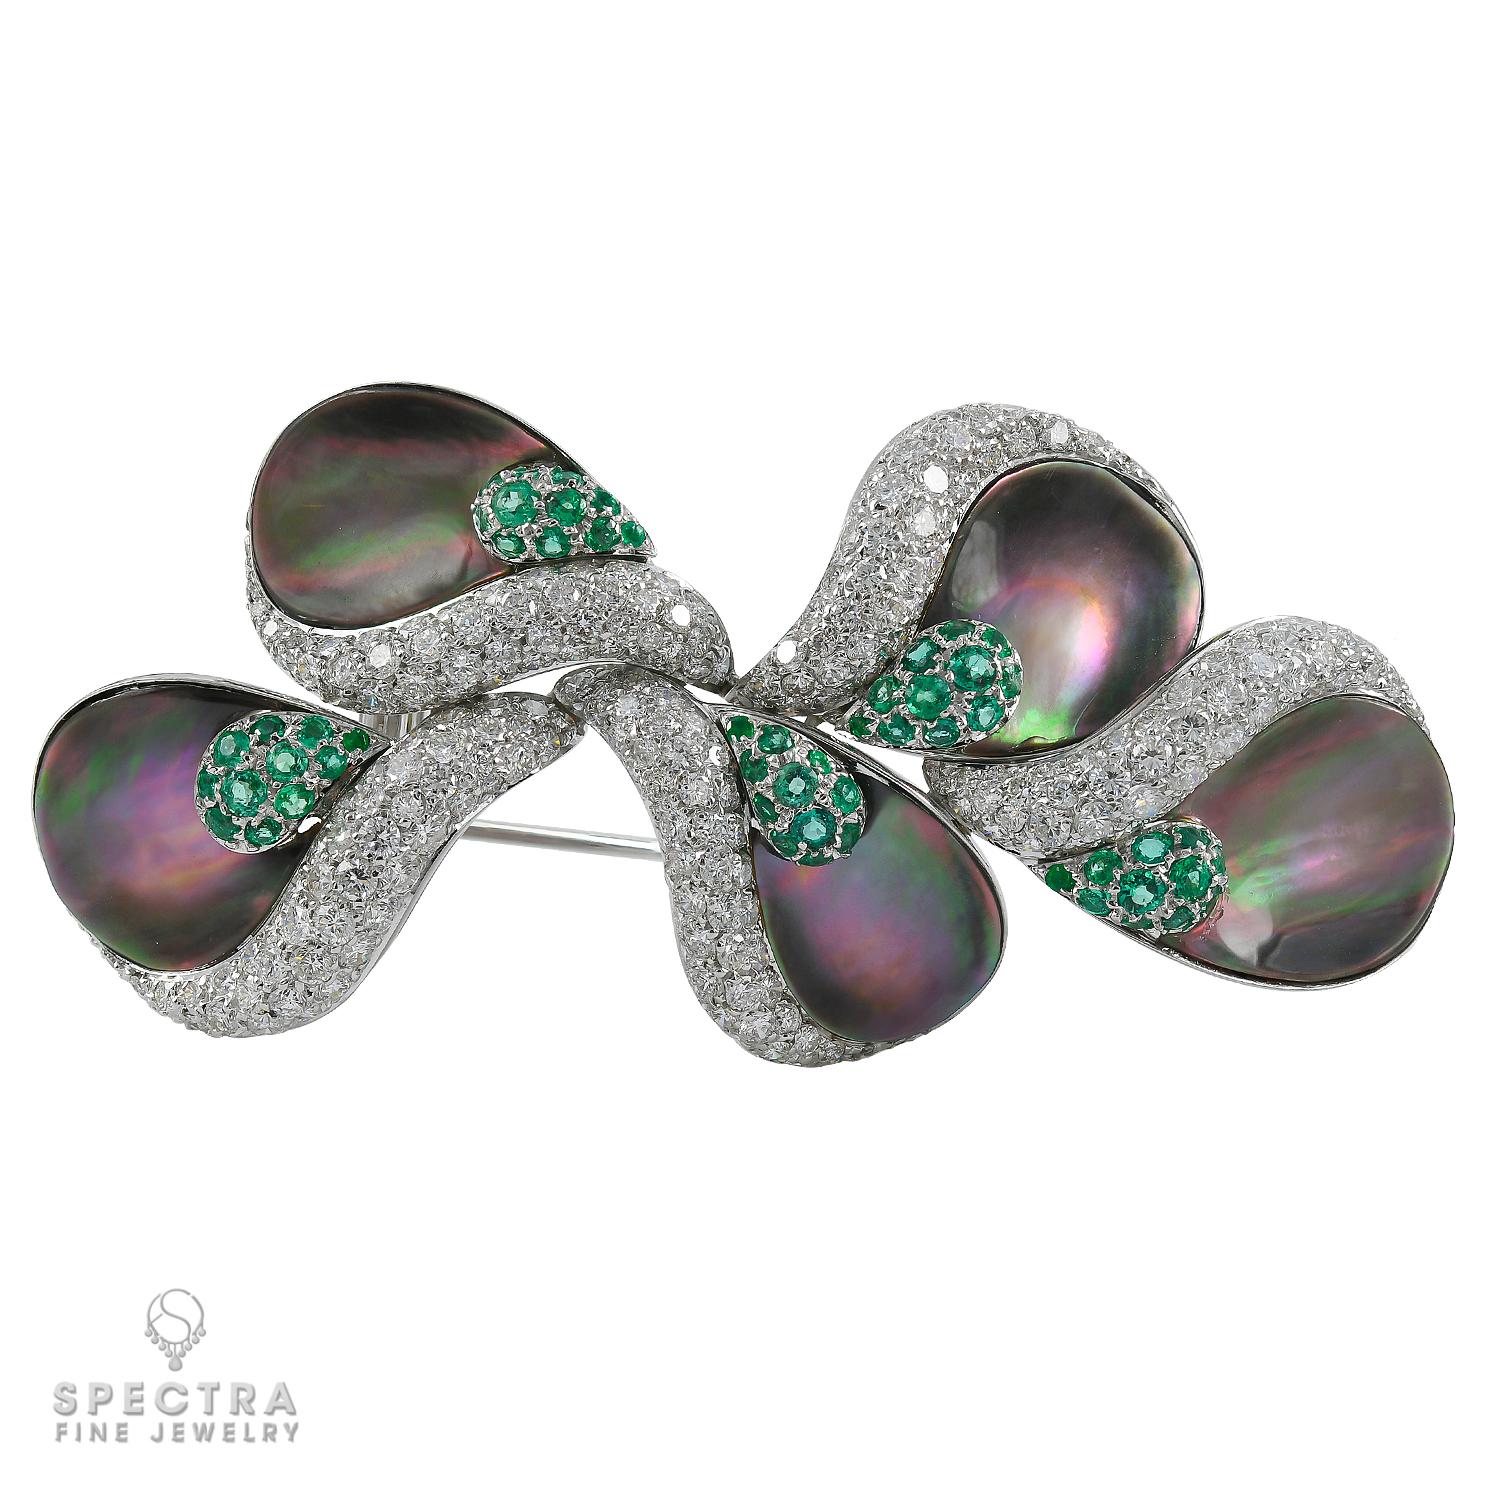 This mysterious double pinstem De Ambrosi Contemporary Brooch, made in Italy in the Contemporary Era, circa 2010s, features deeply fascinating organic forms, crafted in 18K white gold and set with a host of sensual gems. Iridescent mother-of-pearl